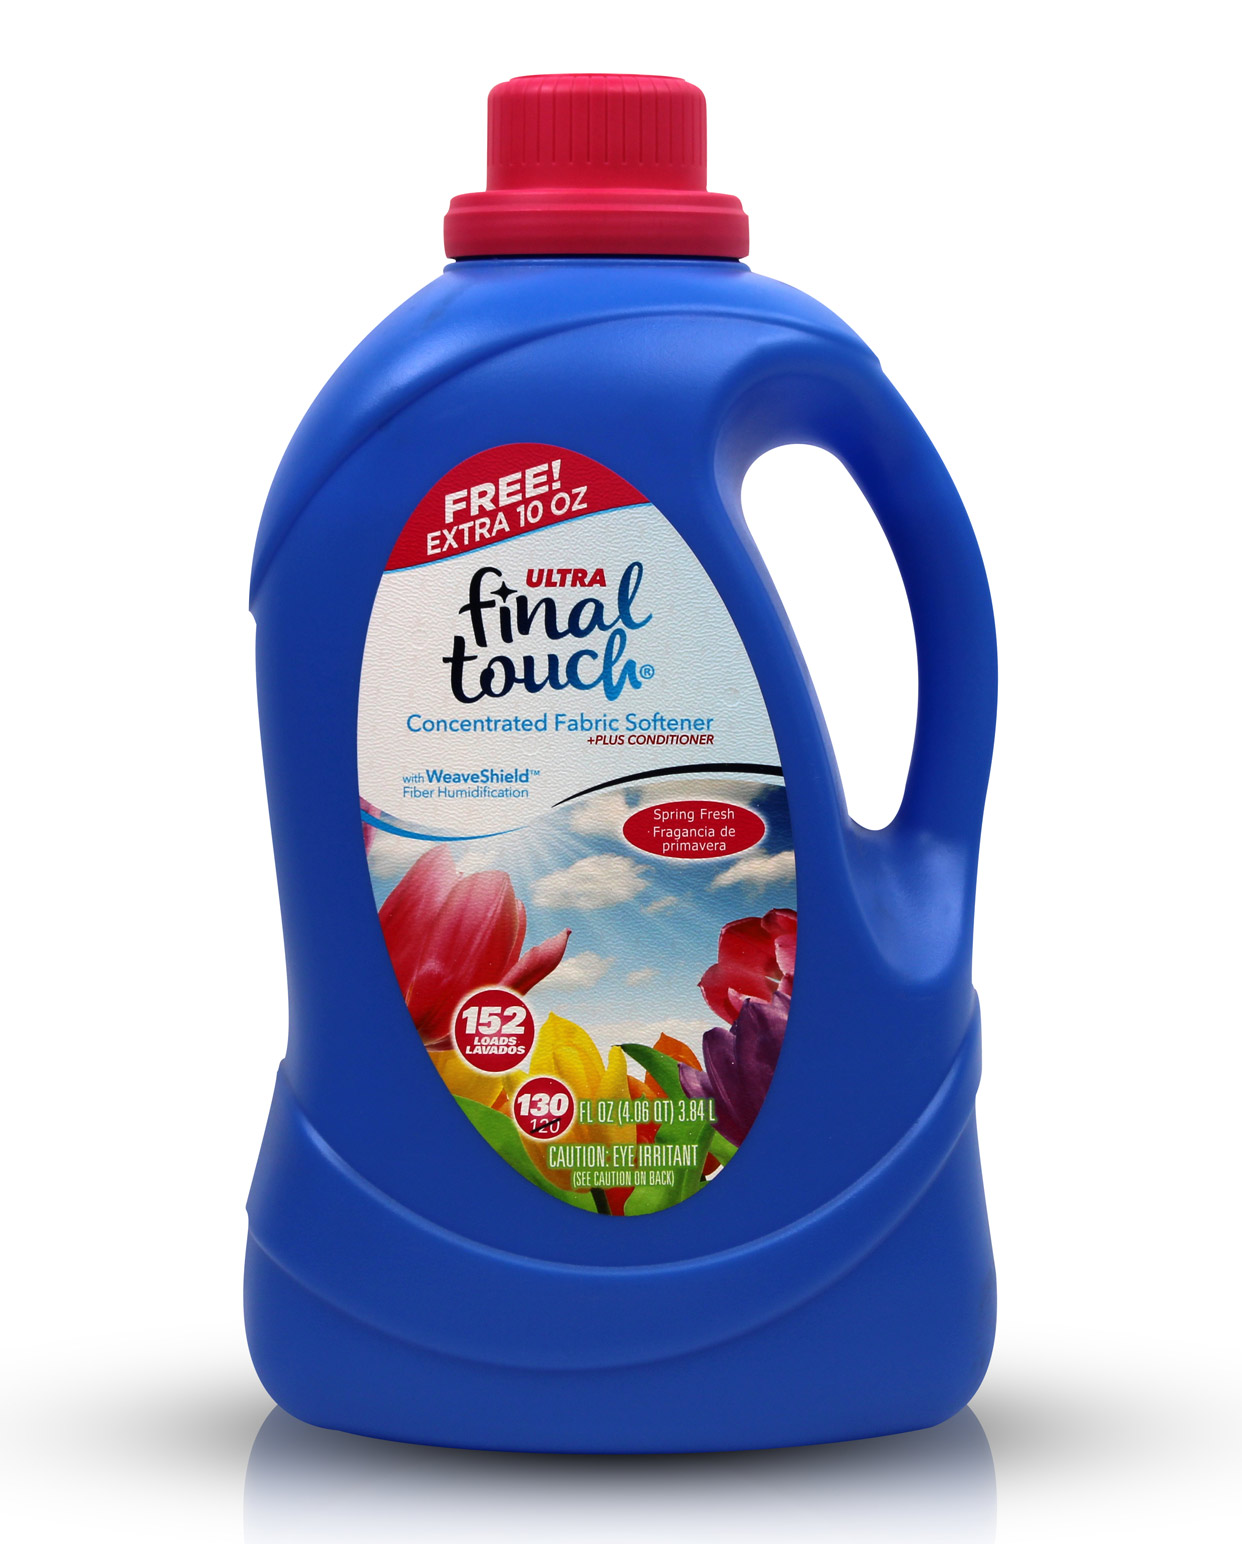 130oz bottle of Best Fabric Softener with Spring Fresh Scent.